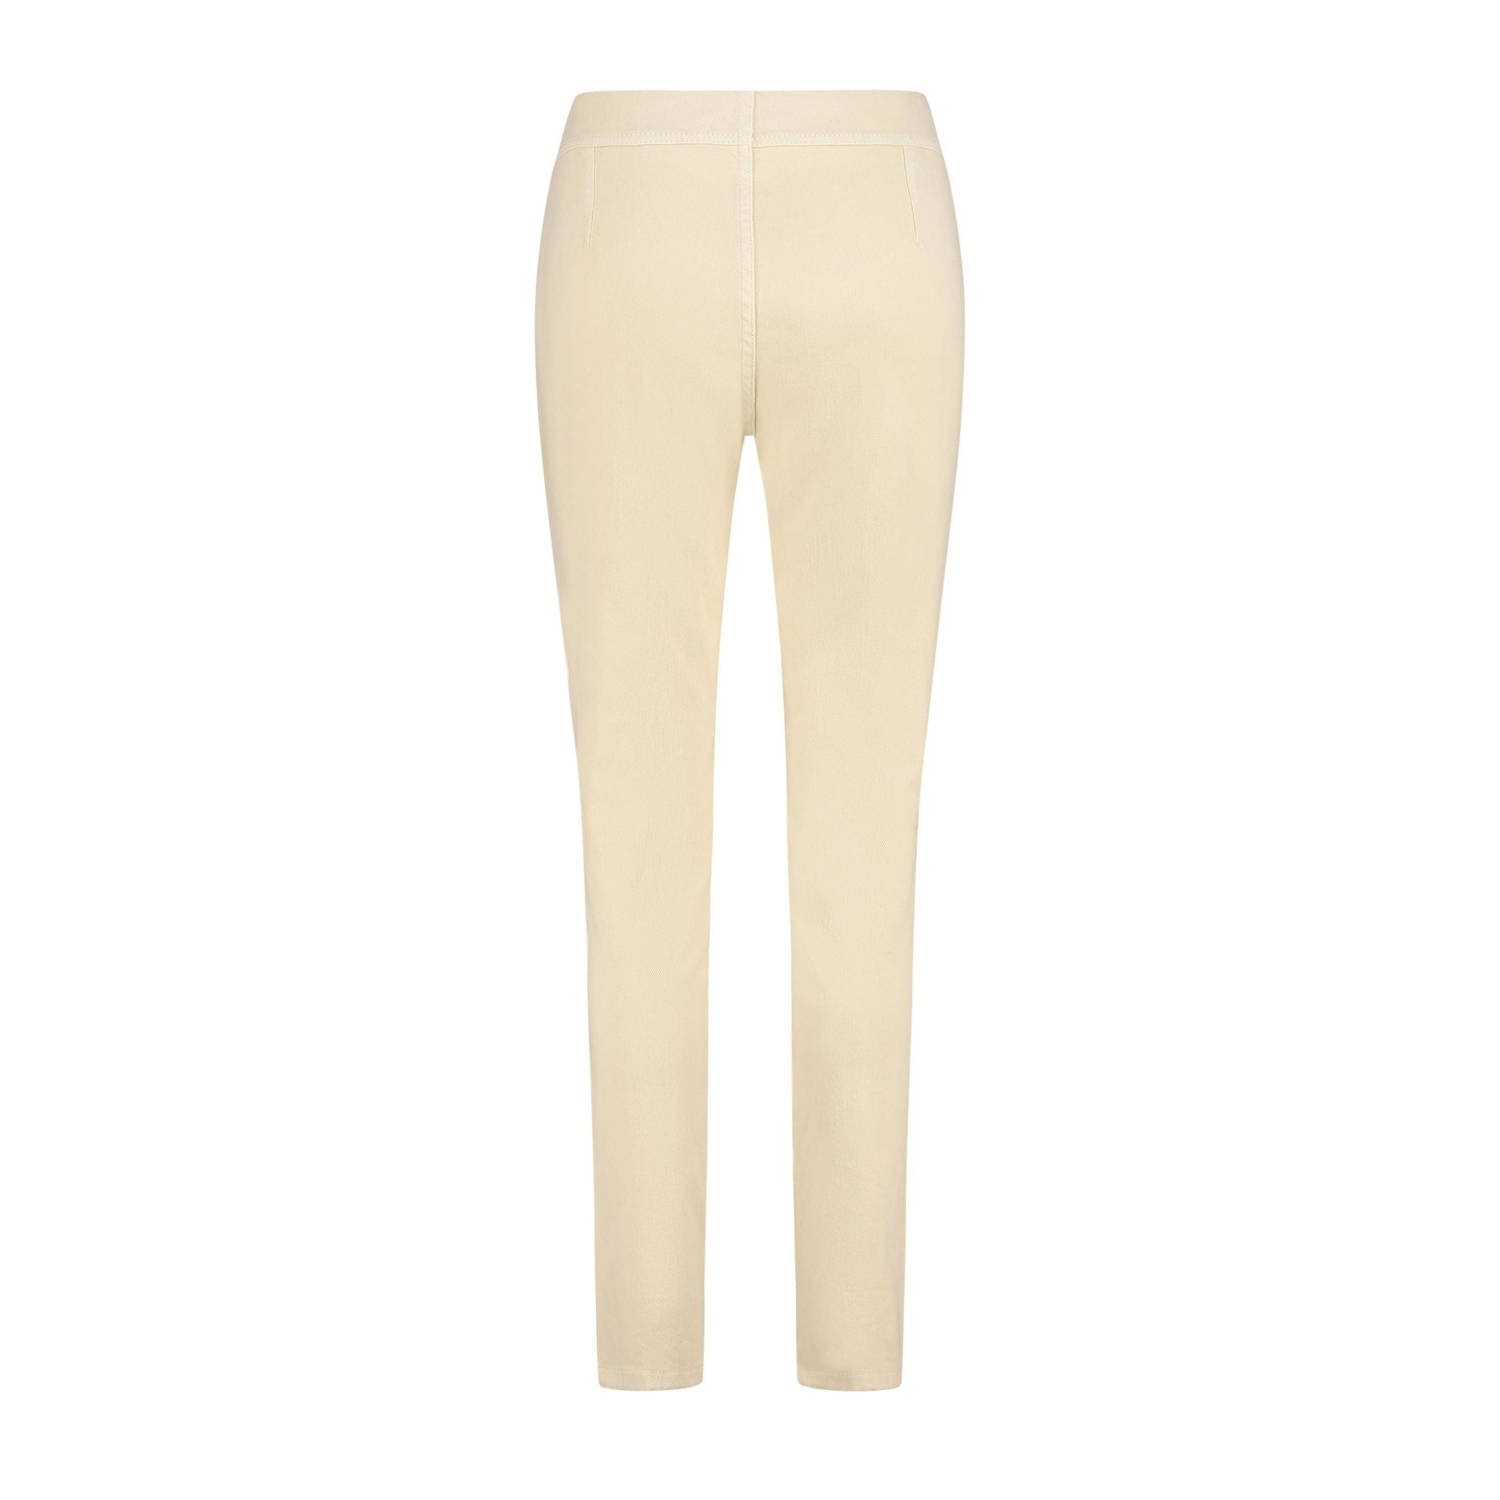 Claudia Sträter skinny jeans beige